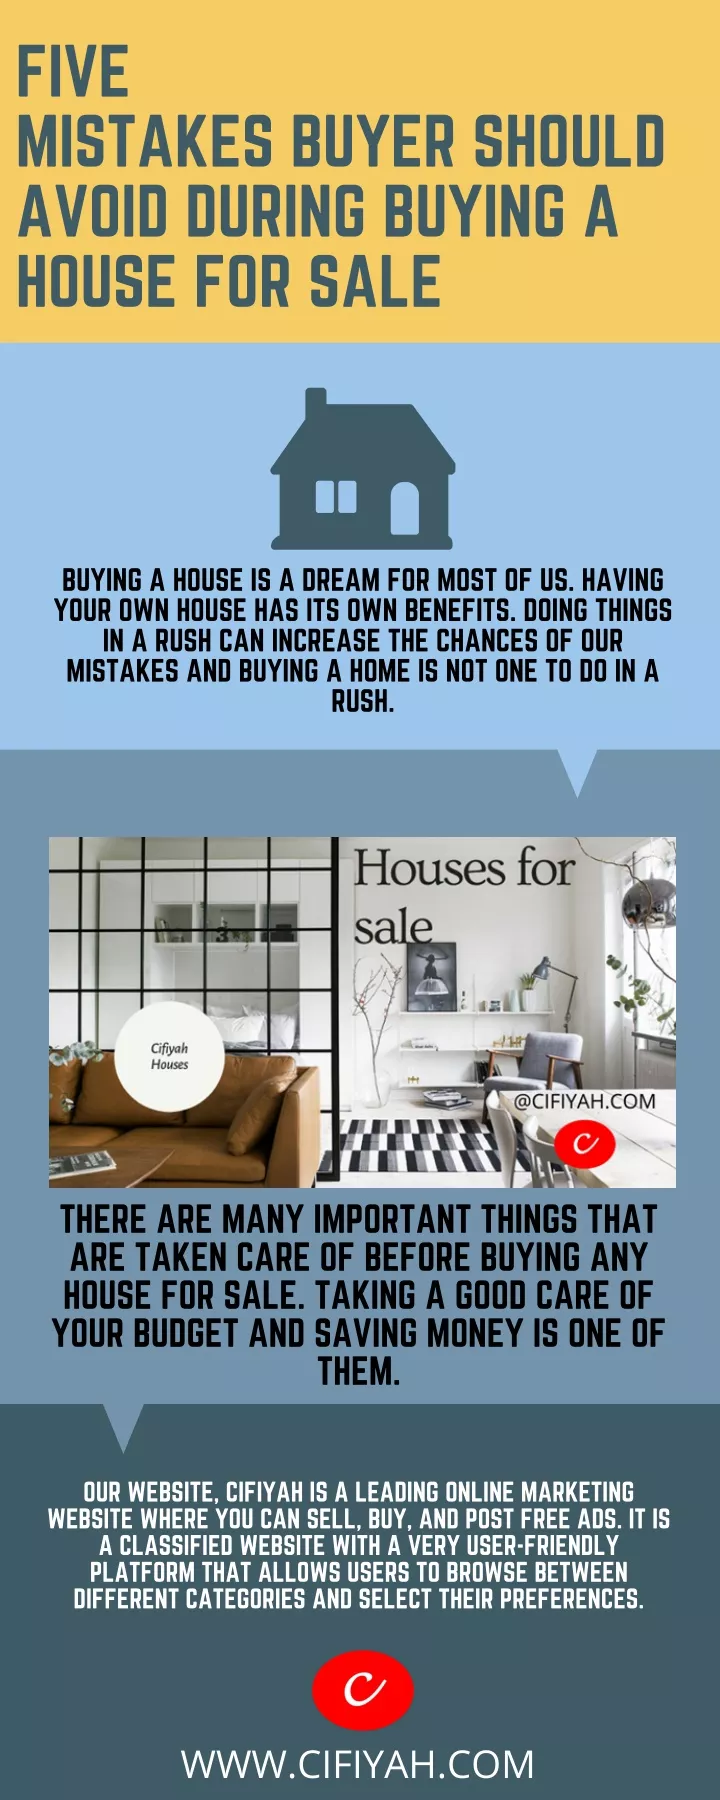 five mistakes buyer should avoid during buying